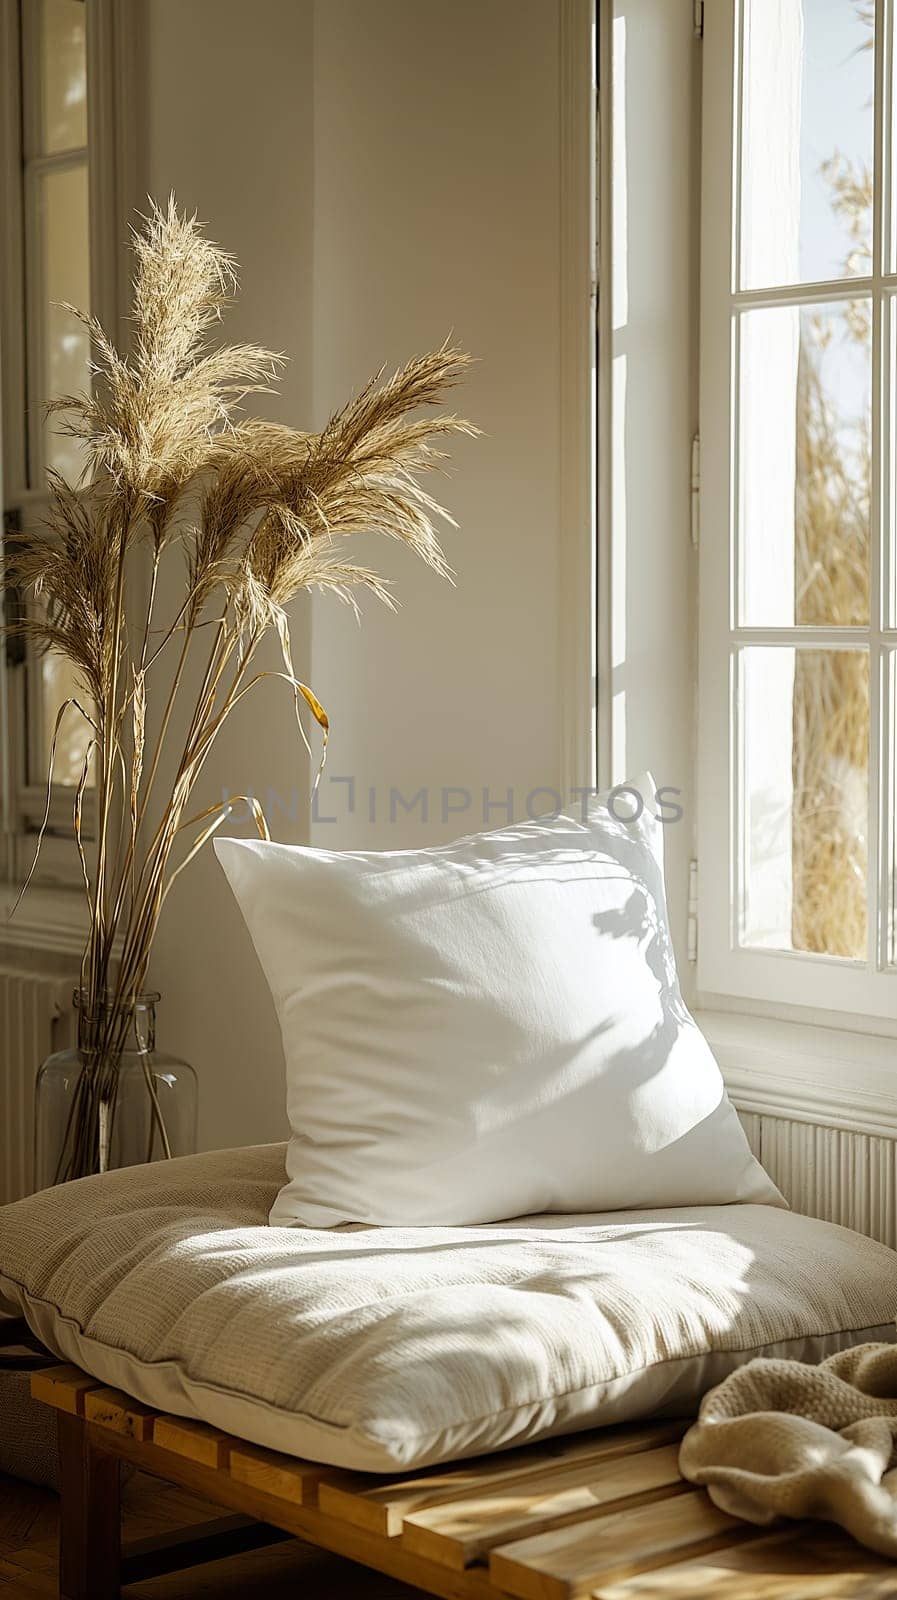 Cozy sunlit corner with cushion and pampas grass by chrisroll